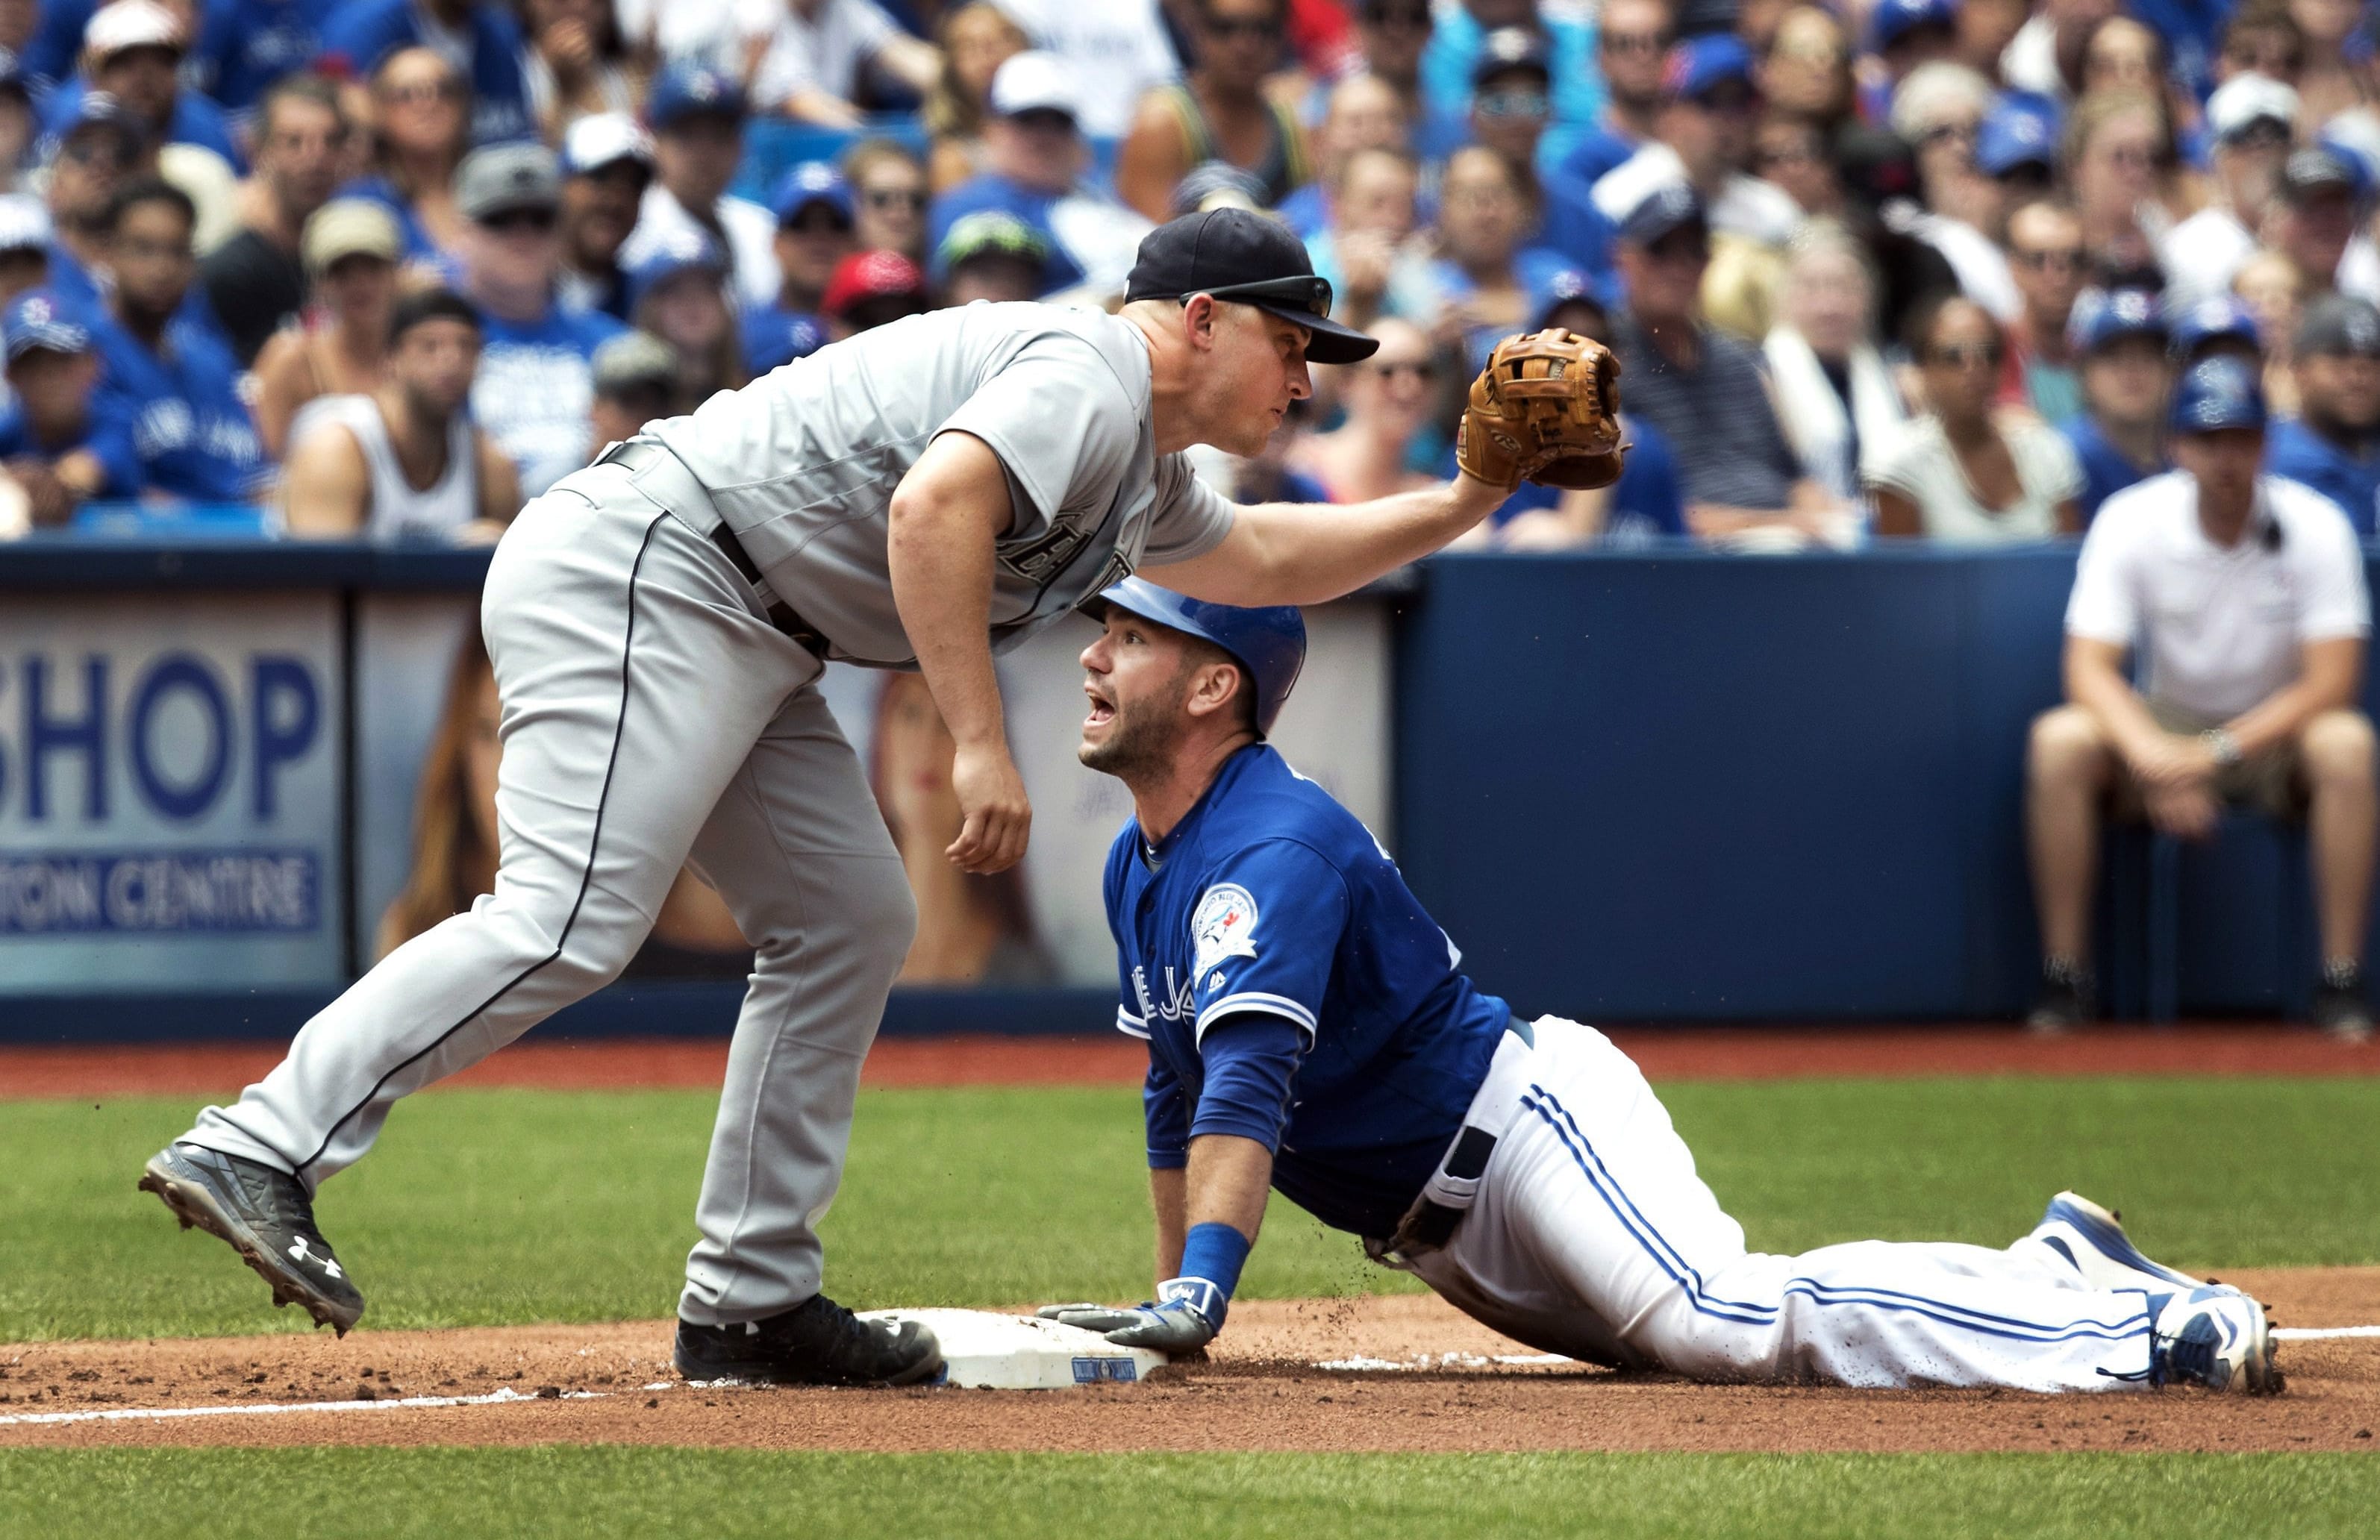 Toronto Blue Jays' Josh Thole, right, is safe at third base as Seattle Mariners Kyle Seager is late with the tag during the sixth inning of a baseball game in Toronto, Sunday, July 24, 2016.